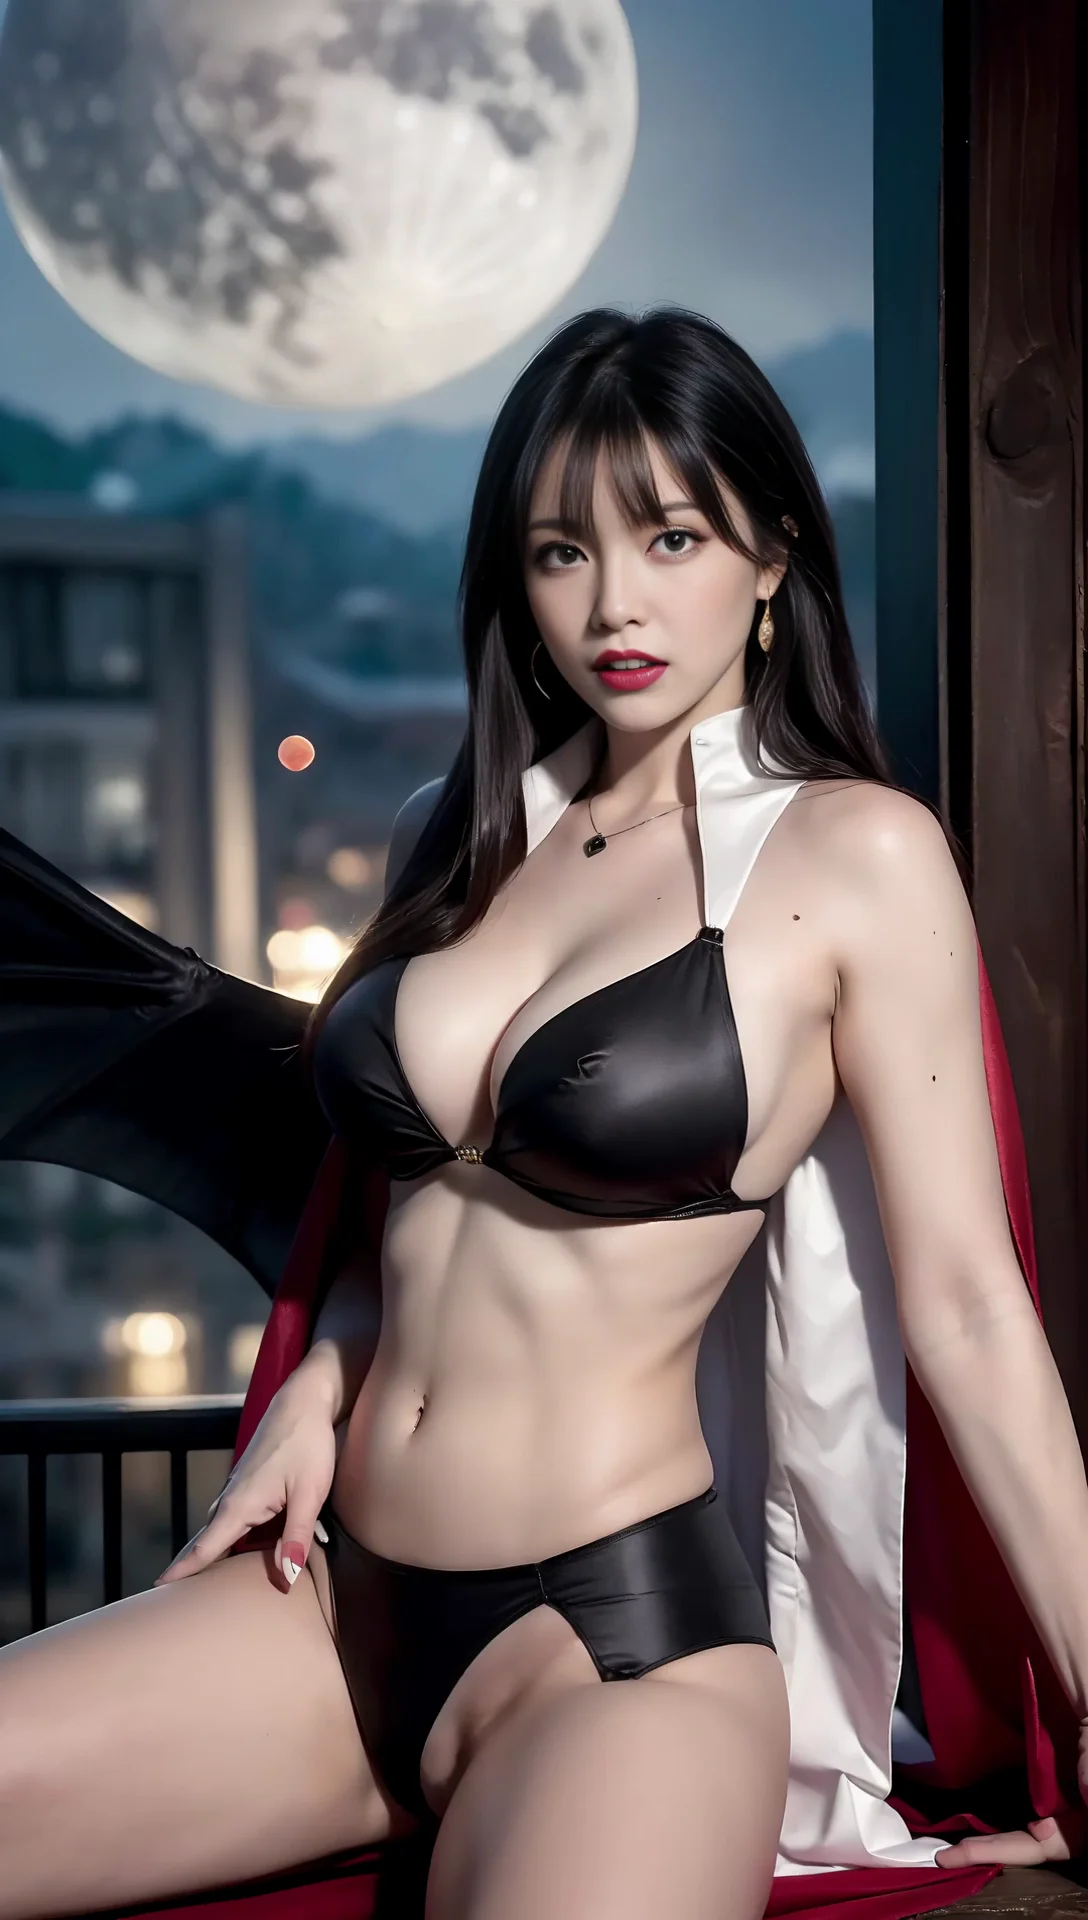 Ai Art LookBook: Sexy Girls in Vampire Cosplay Images 14